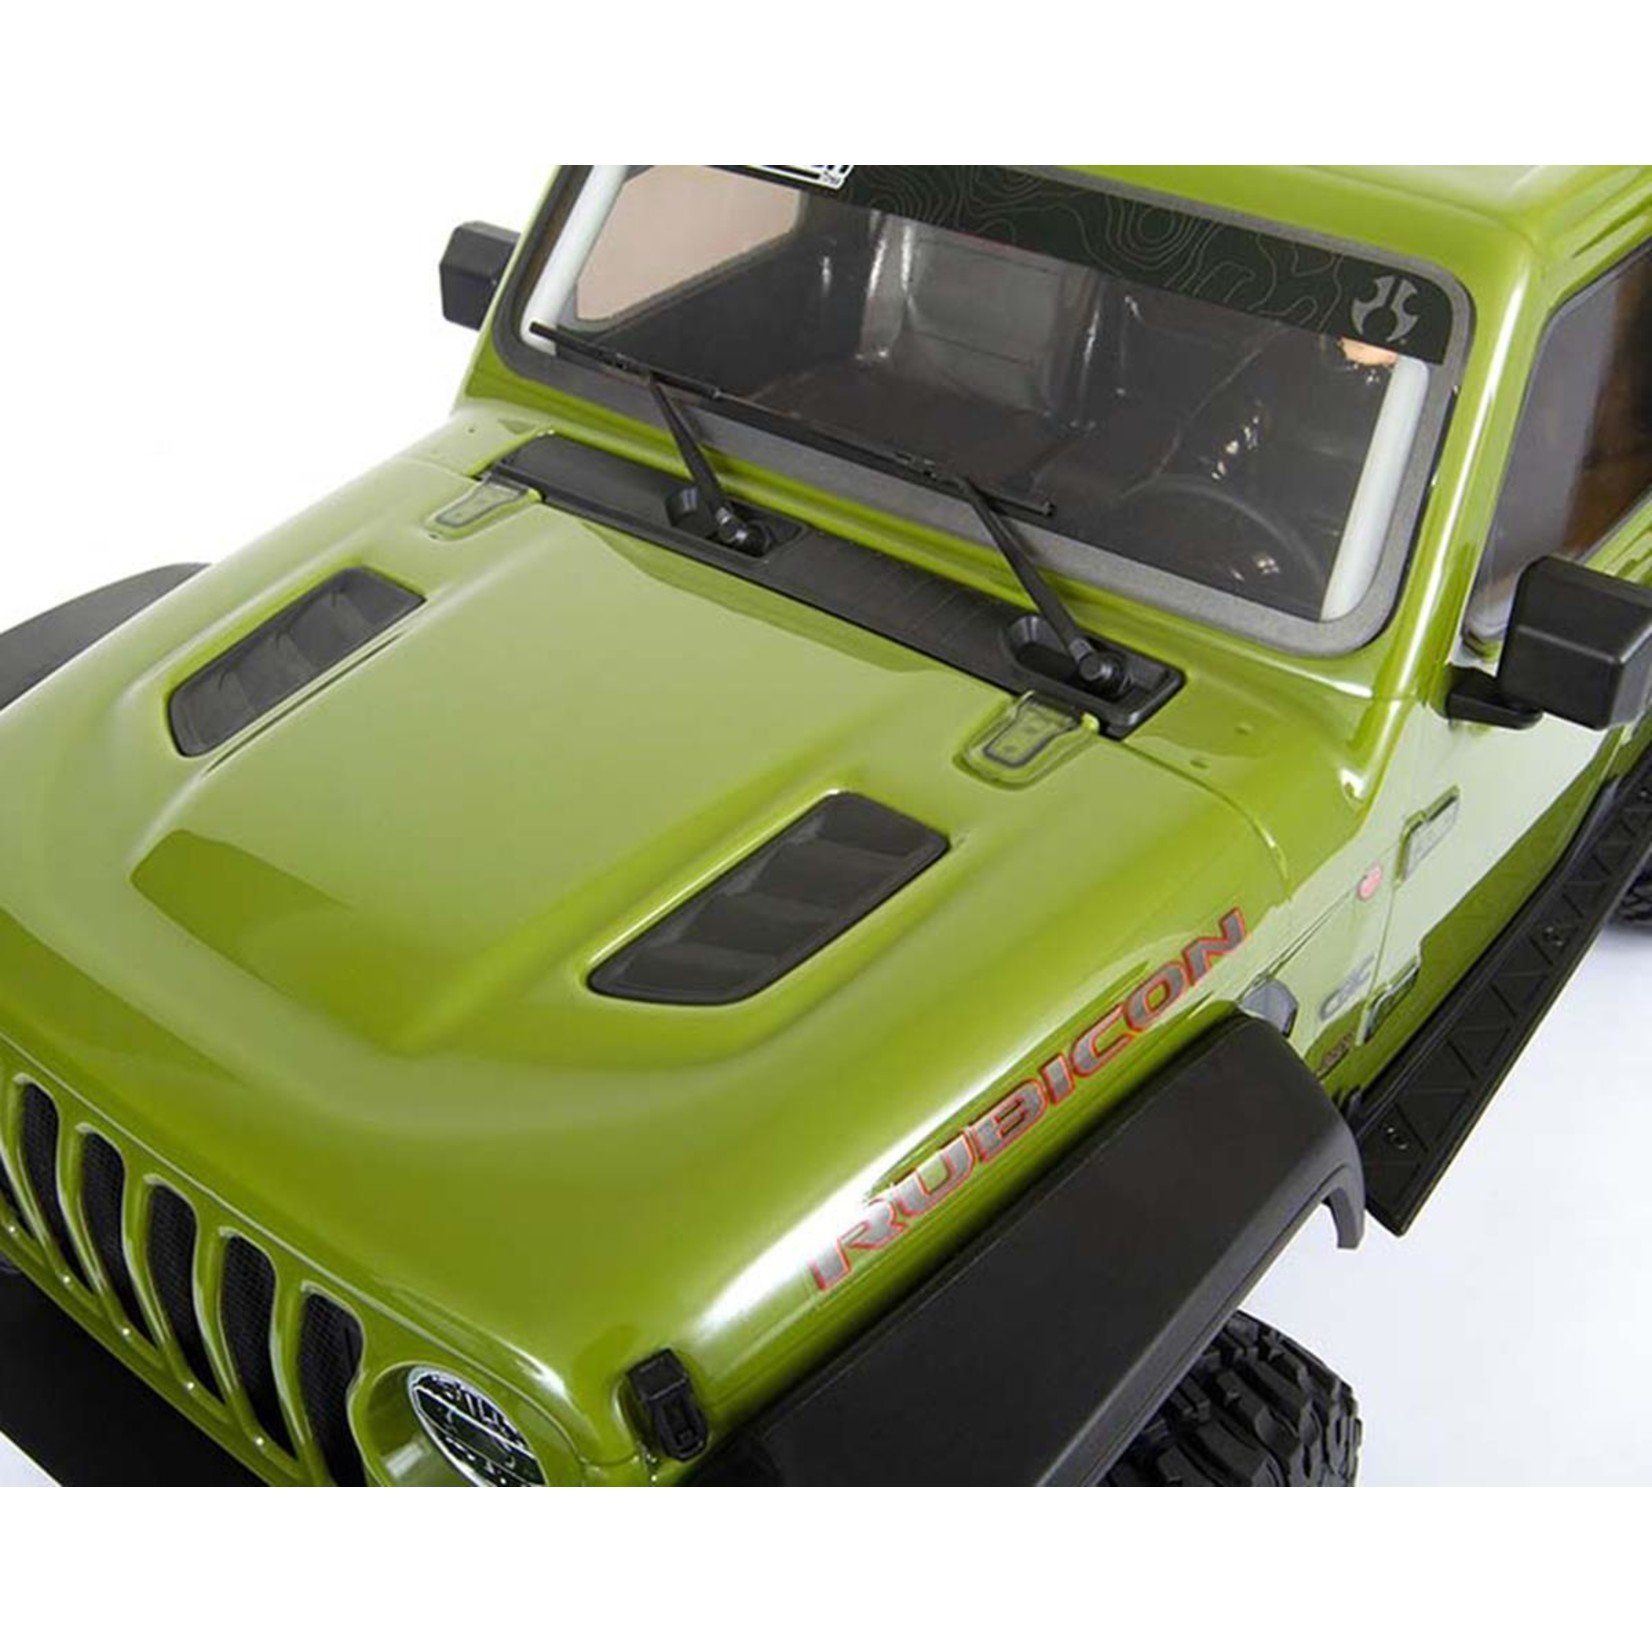 Axial 1/6 SCX6 Jeep JLU Wrangler 4WD Rock Crawler RTR: Green #AXI05000T1 -  Hobby Time RC